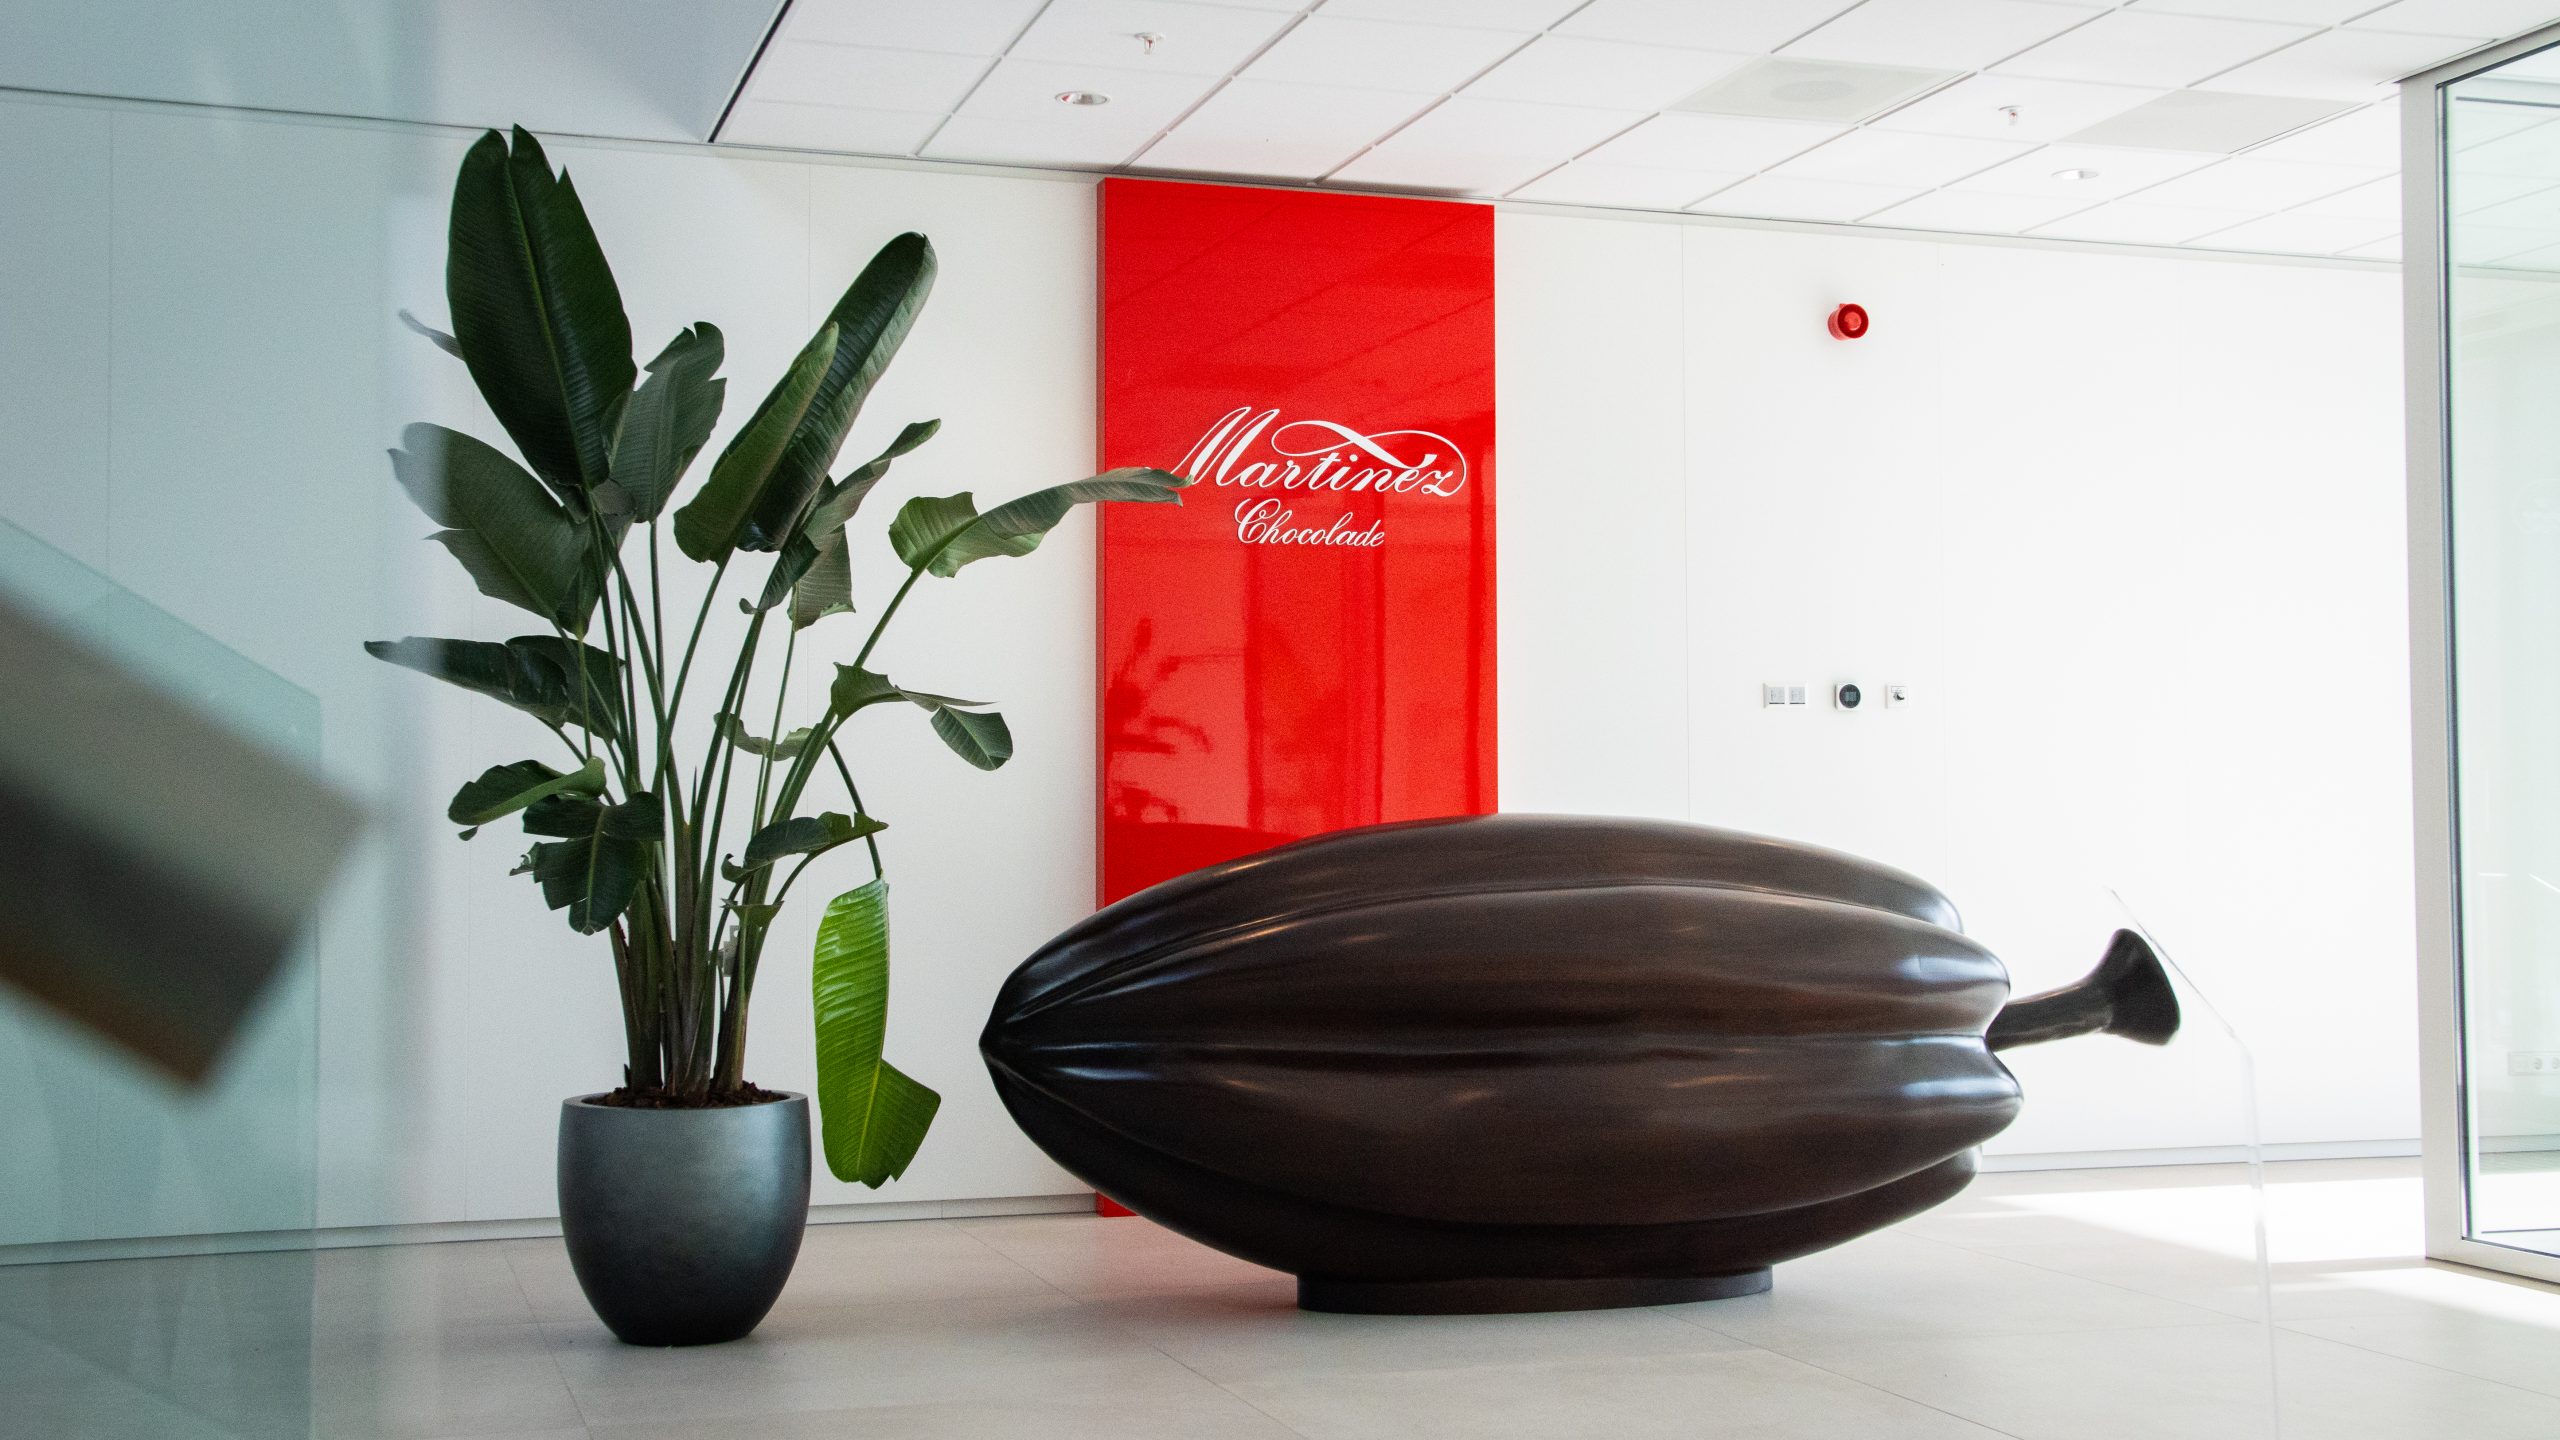 Maars supplies complete office interior for Martinez Chocolade